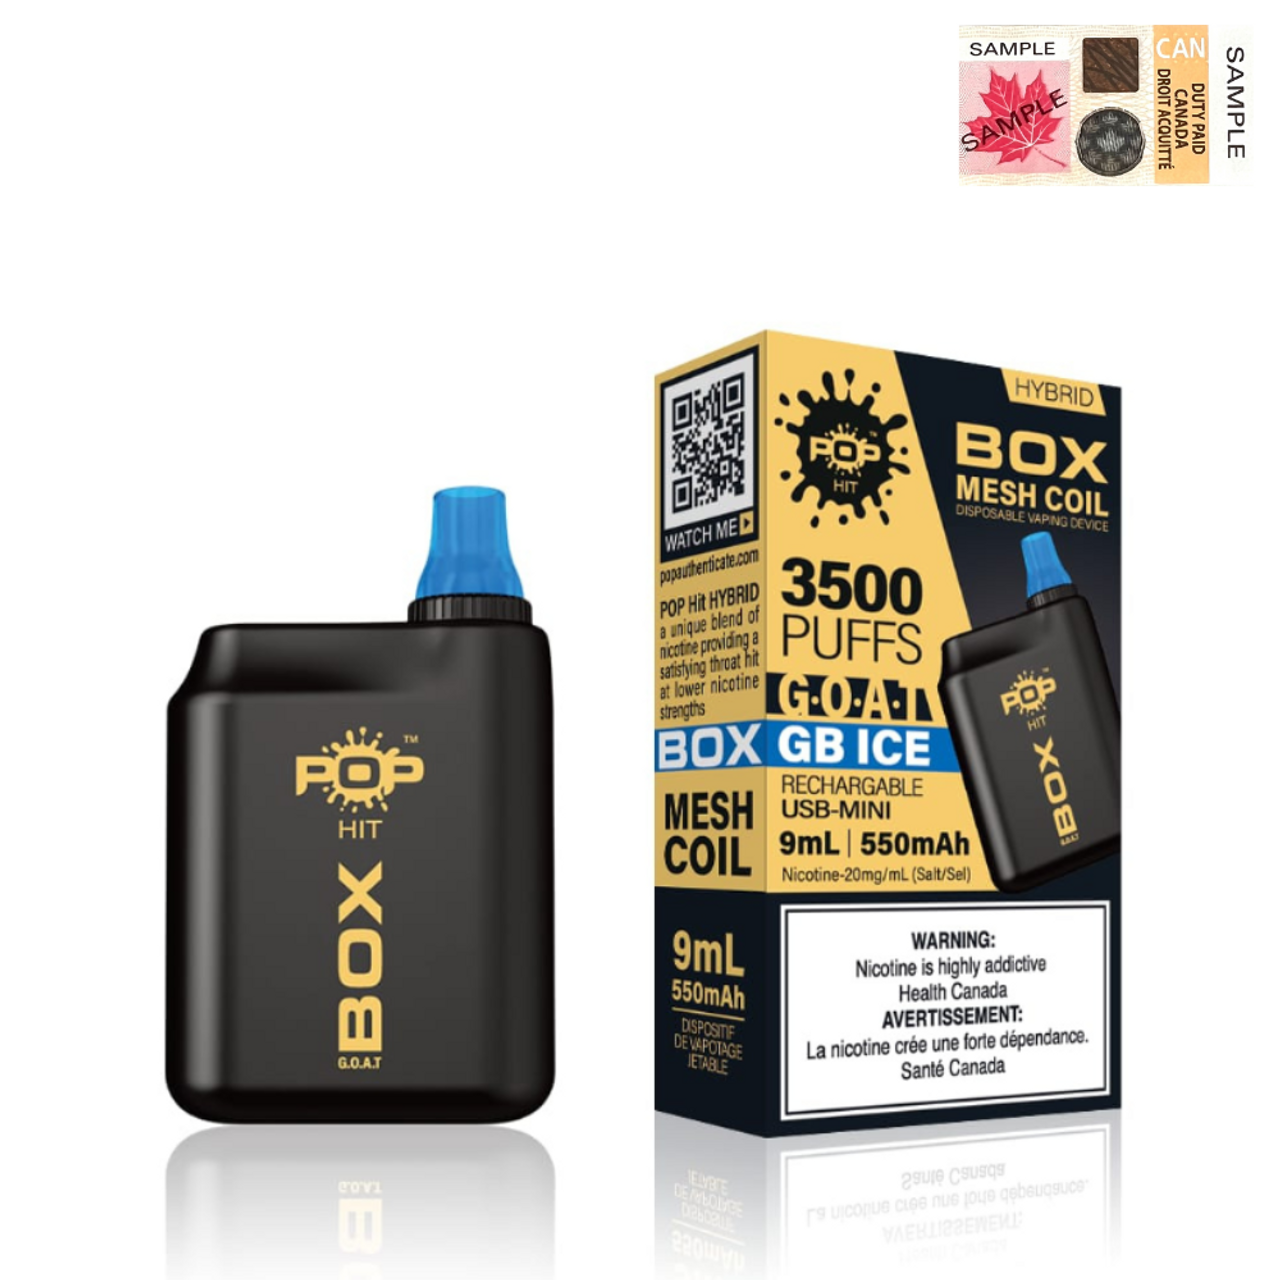 (Stamped) GB Ice Pop Hybrid Box G.O.A.T 3500 Puffs Disposable Vape Ct-5